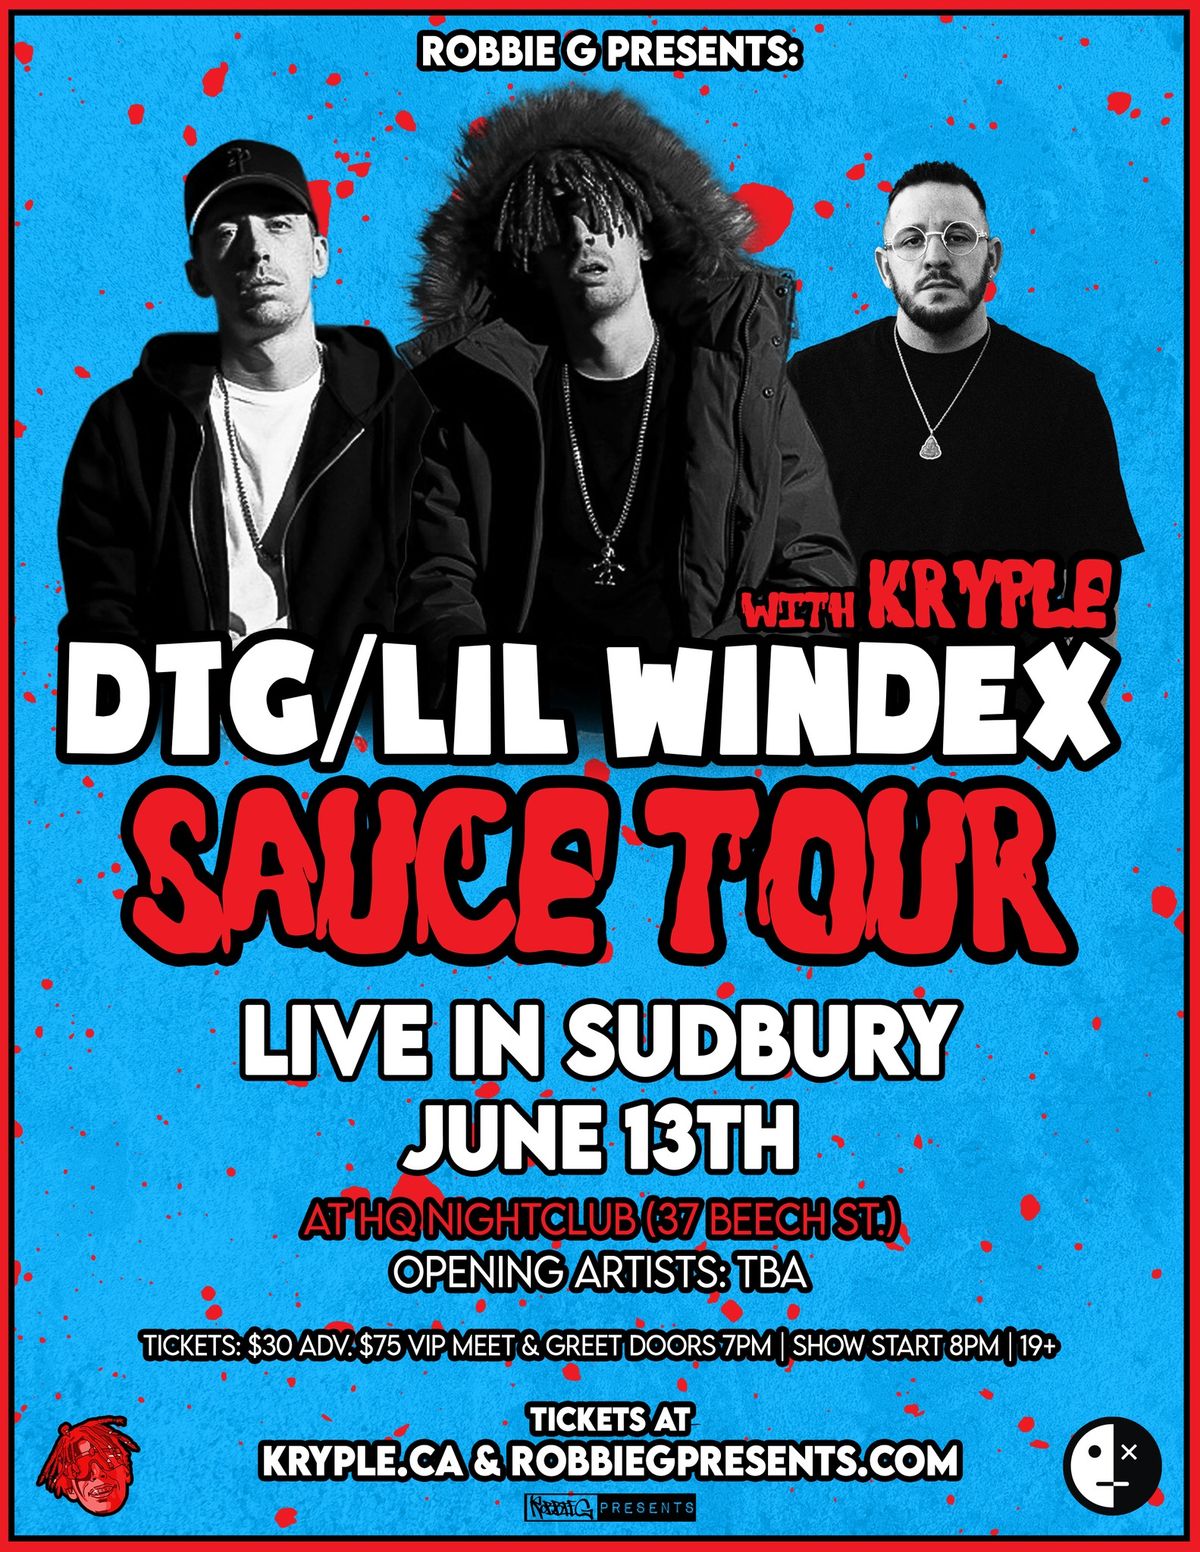 DTG\/Lil Windex Live in Sudbury June 13th at HQ Nightclub with Kryple